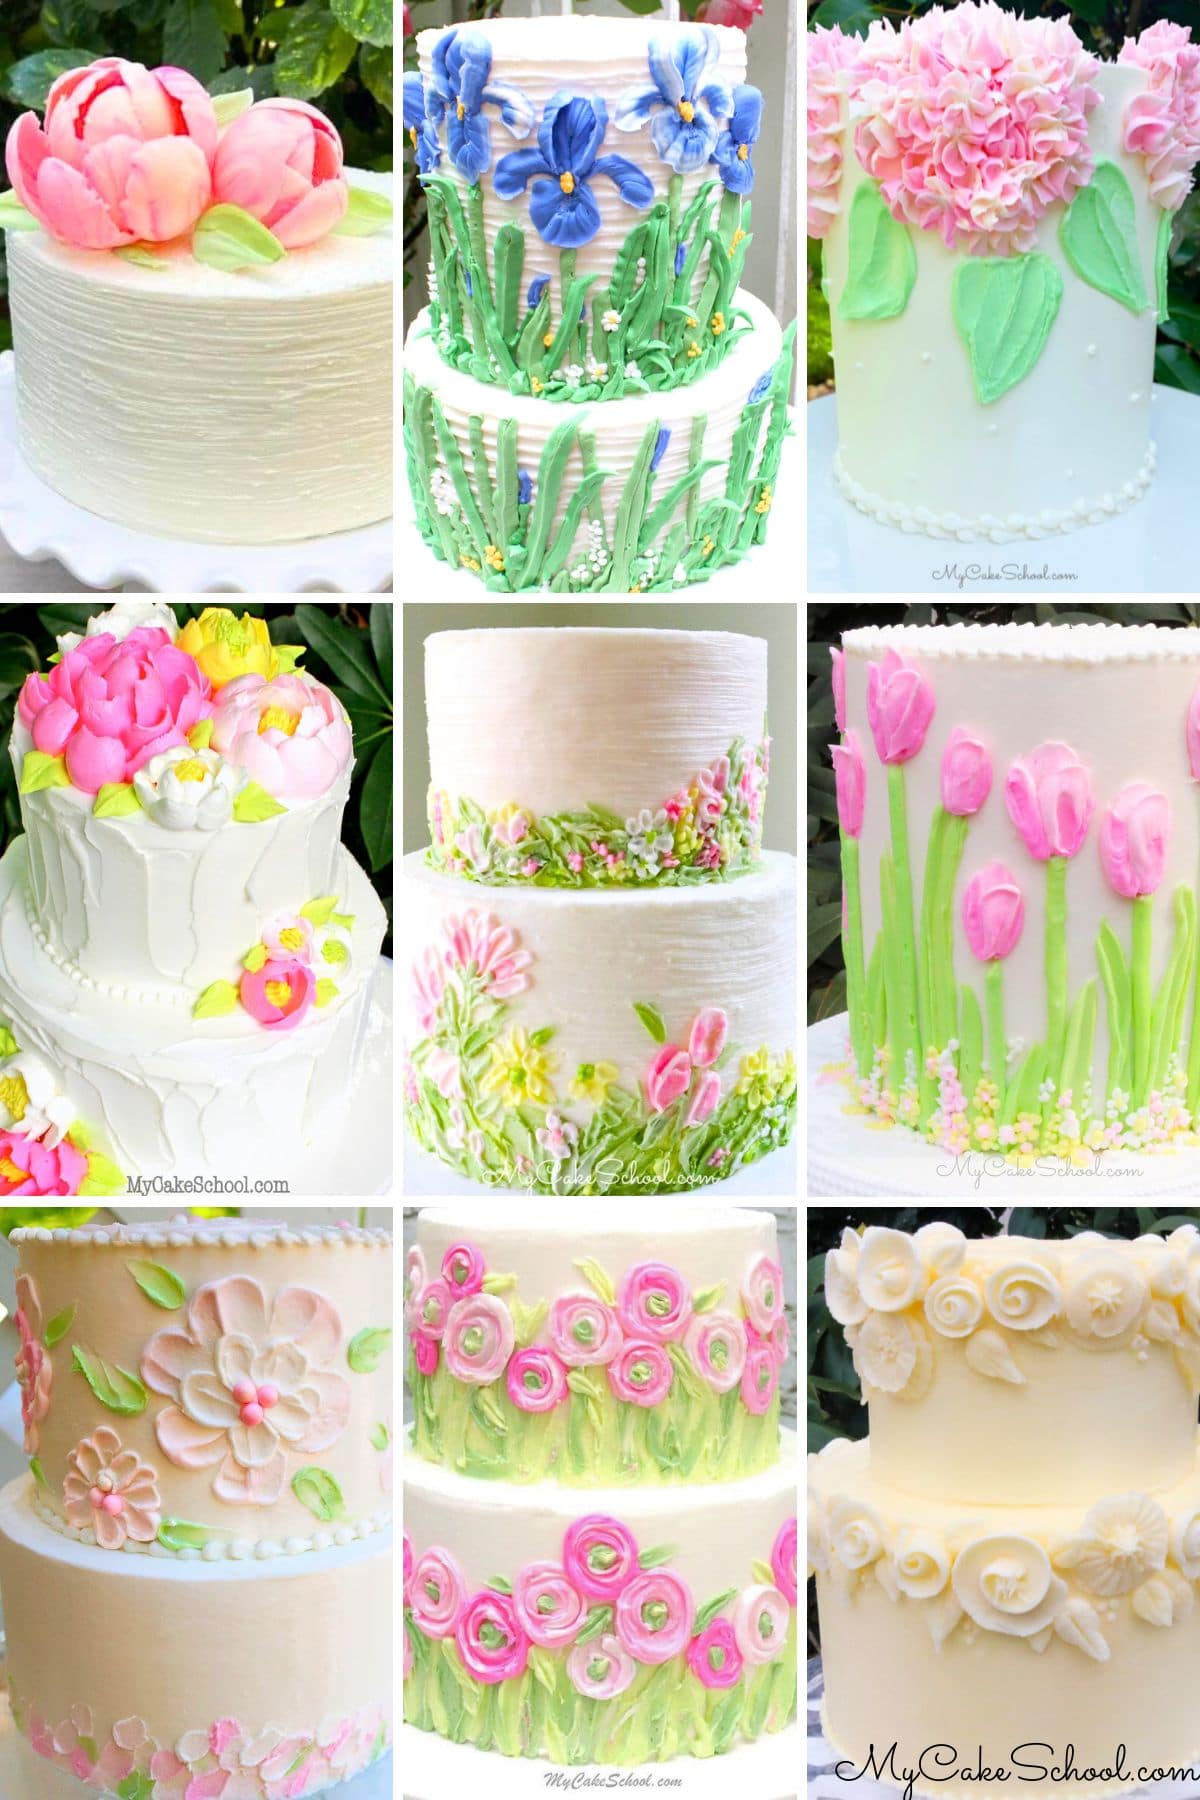 Photo grid of floral cake designs.